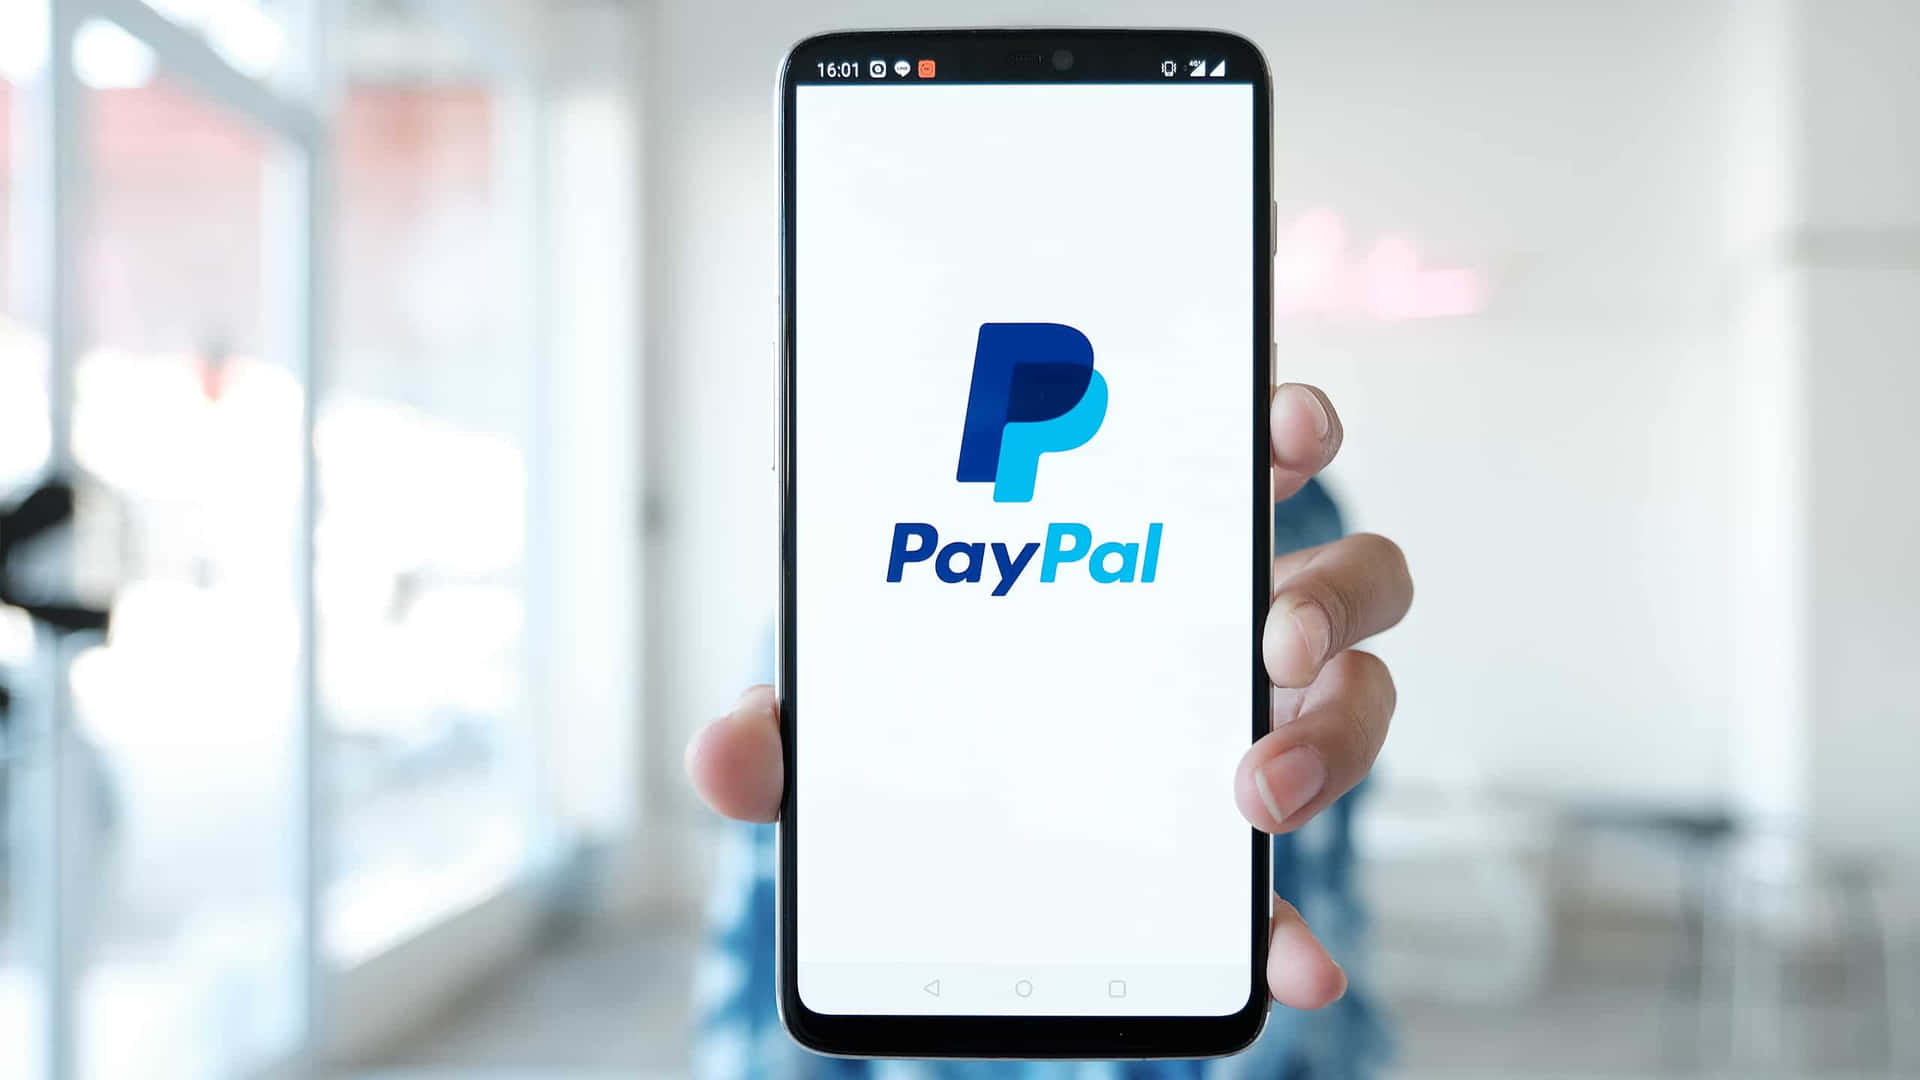 PayPal Debit Card How to open a PayPal account using a Debit Card